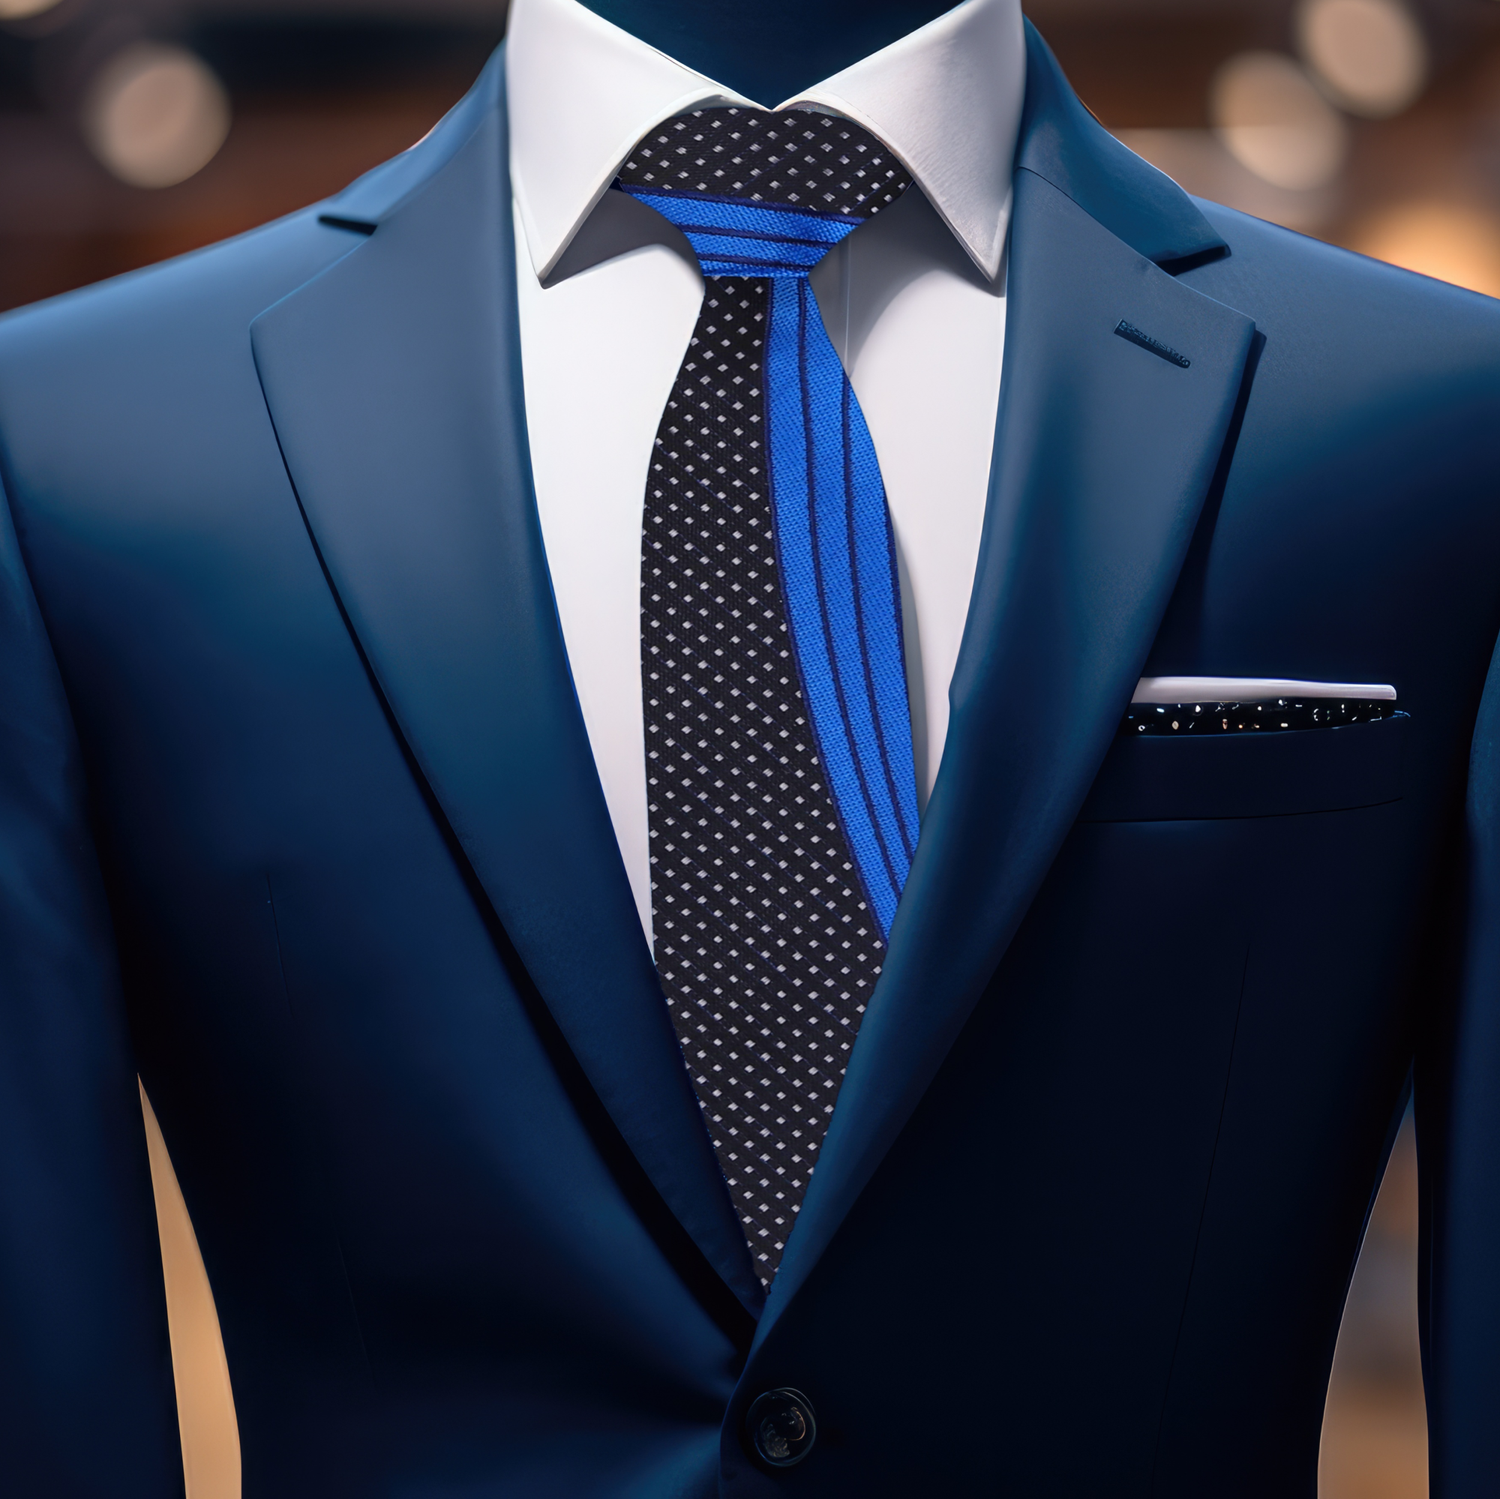 Alt View: Blue, Black United Tie and Square